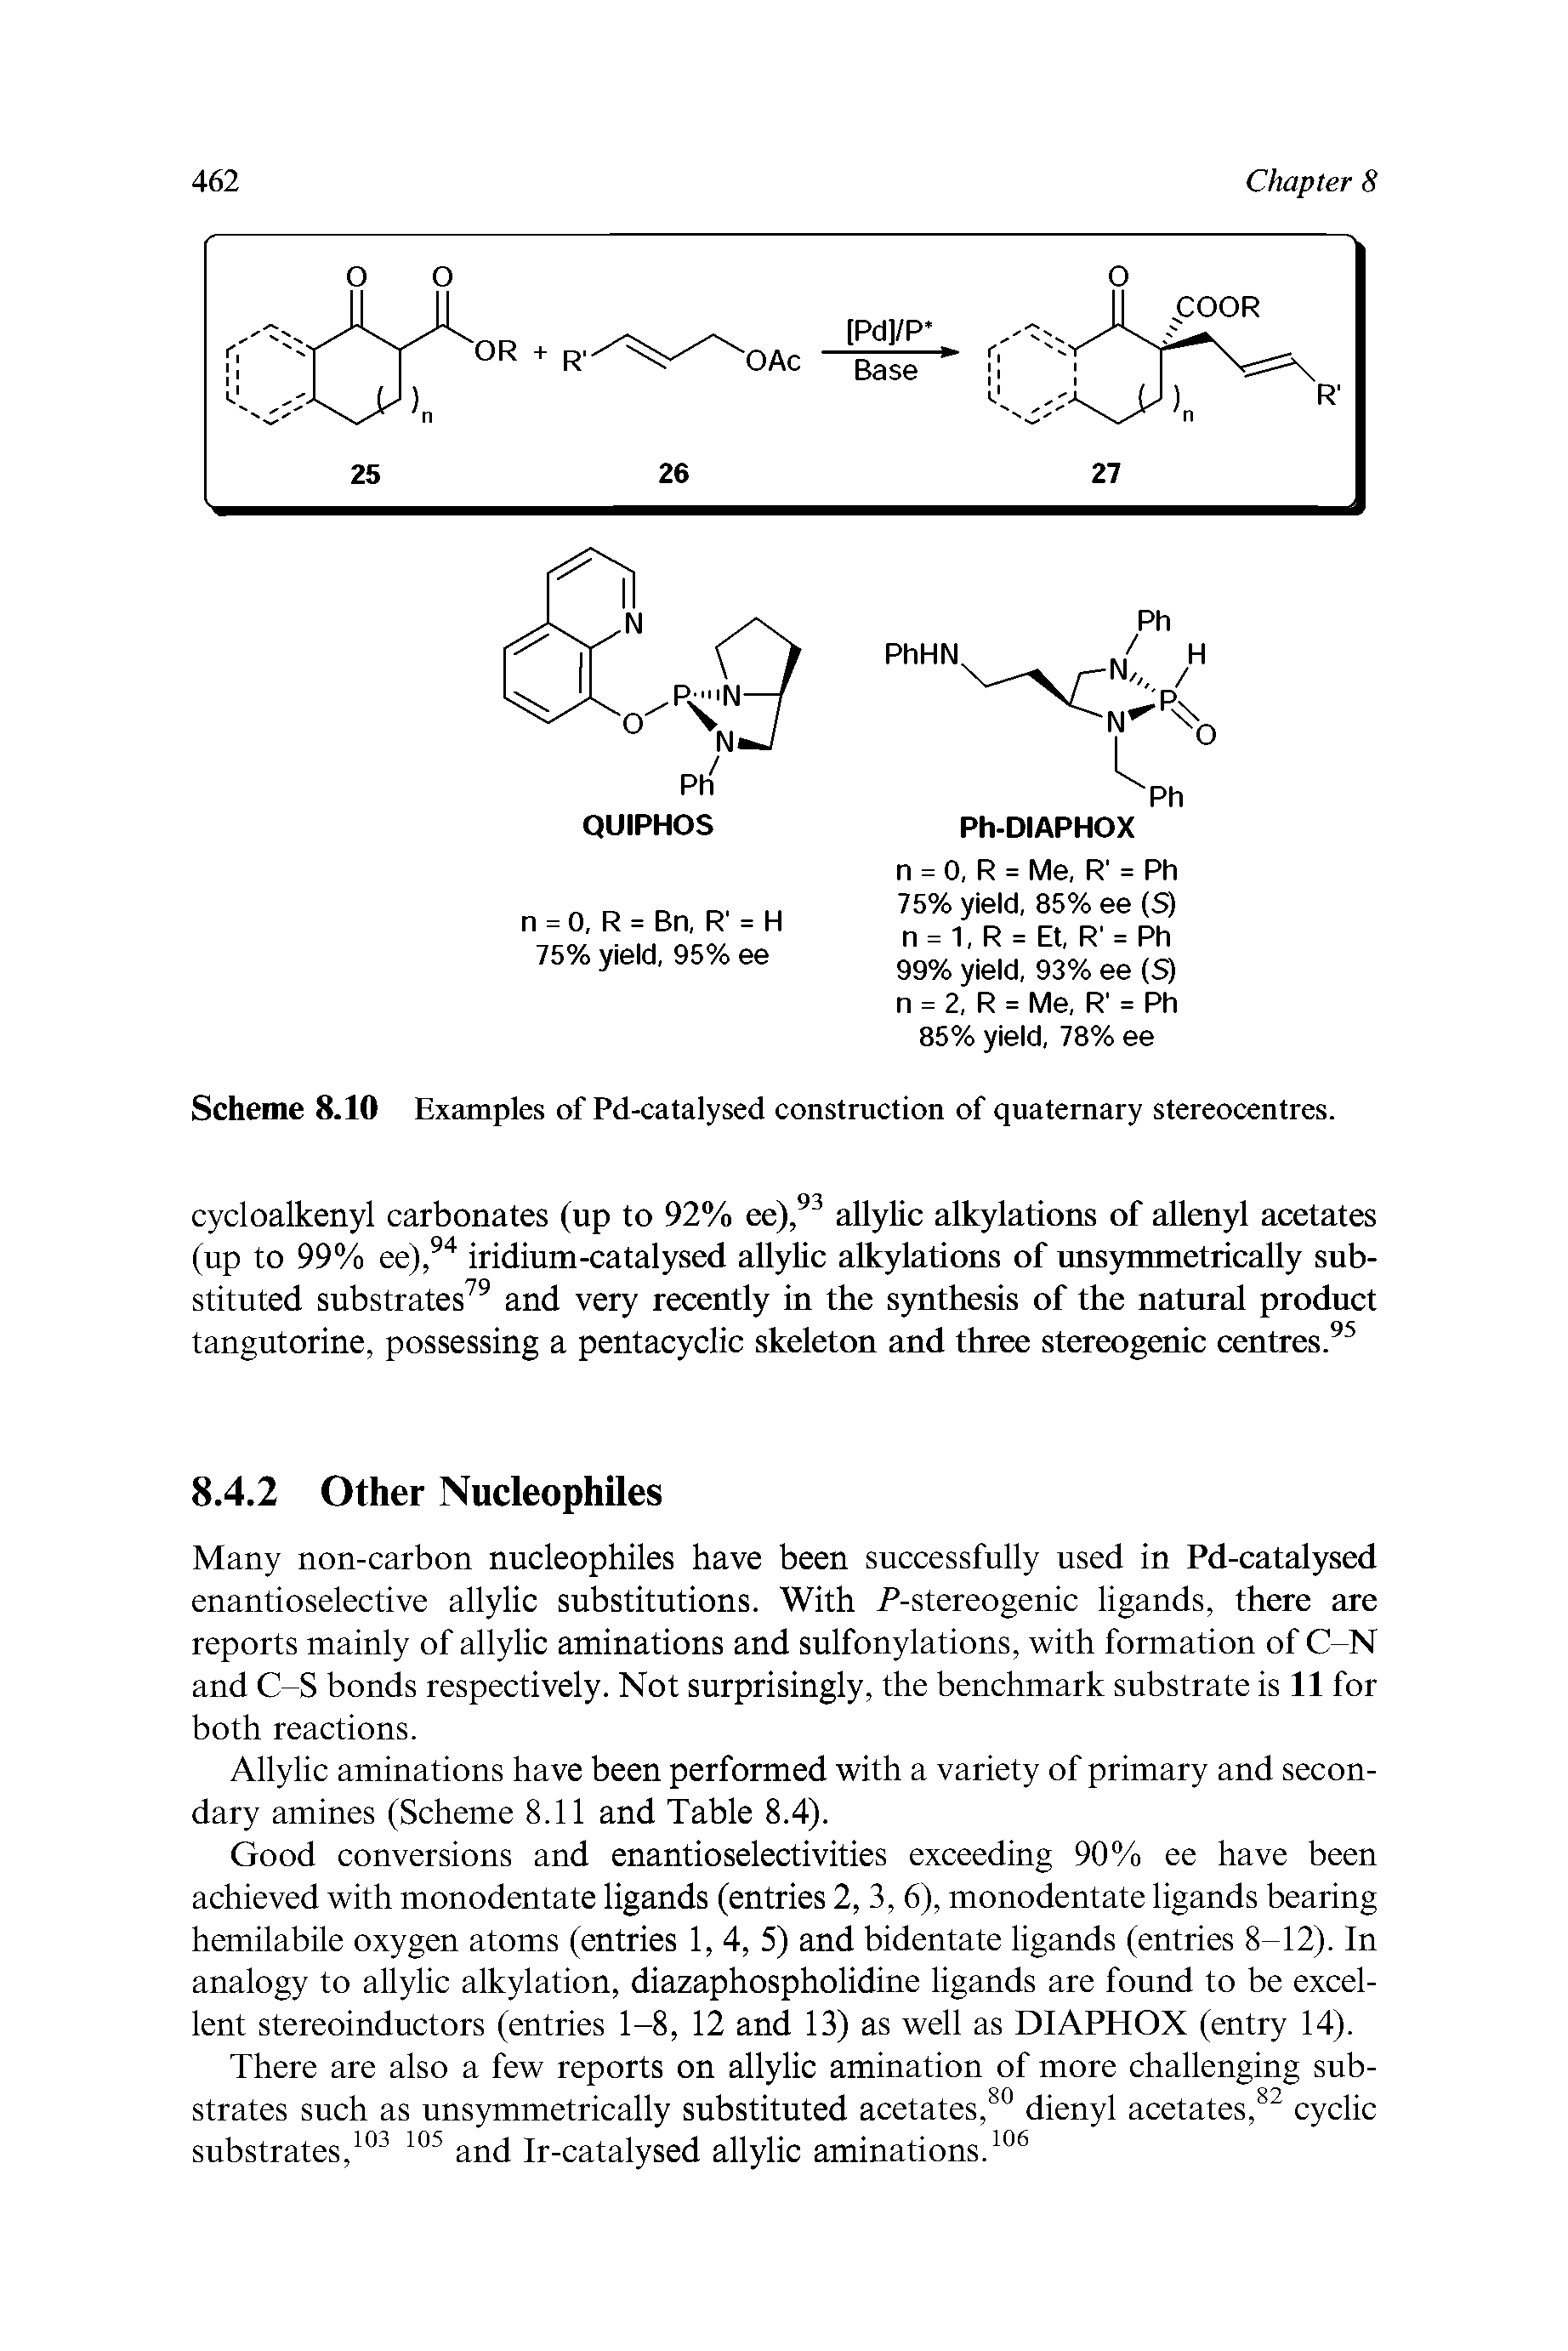 Scheme 8.10 Examples of Pd-catalysed construction of quaternary stereocentres.